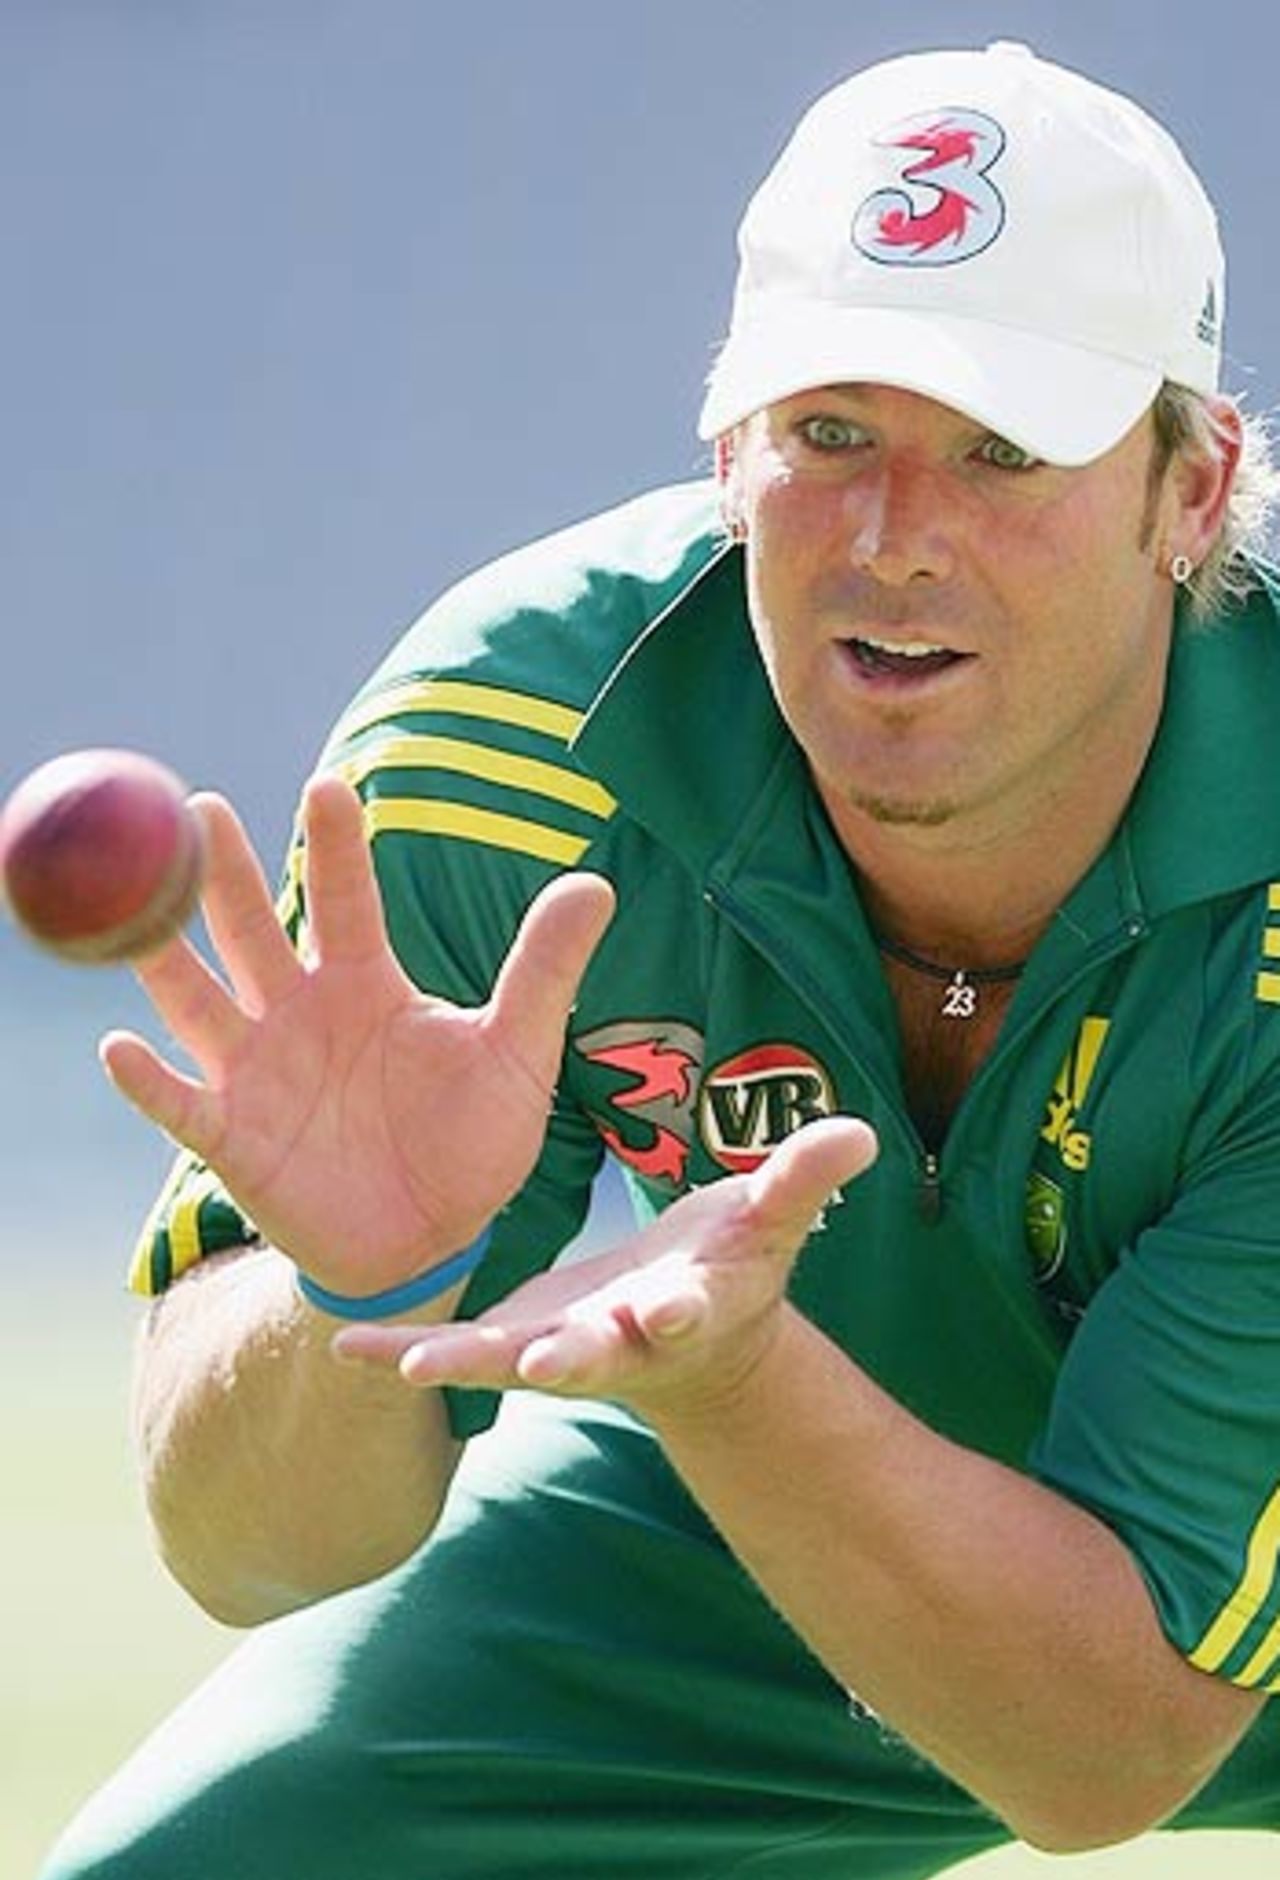 Shane Warne keeps his eyes on the ball as he prepares for the Boxing Day Test at Melbourne, December 24, 2005